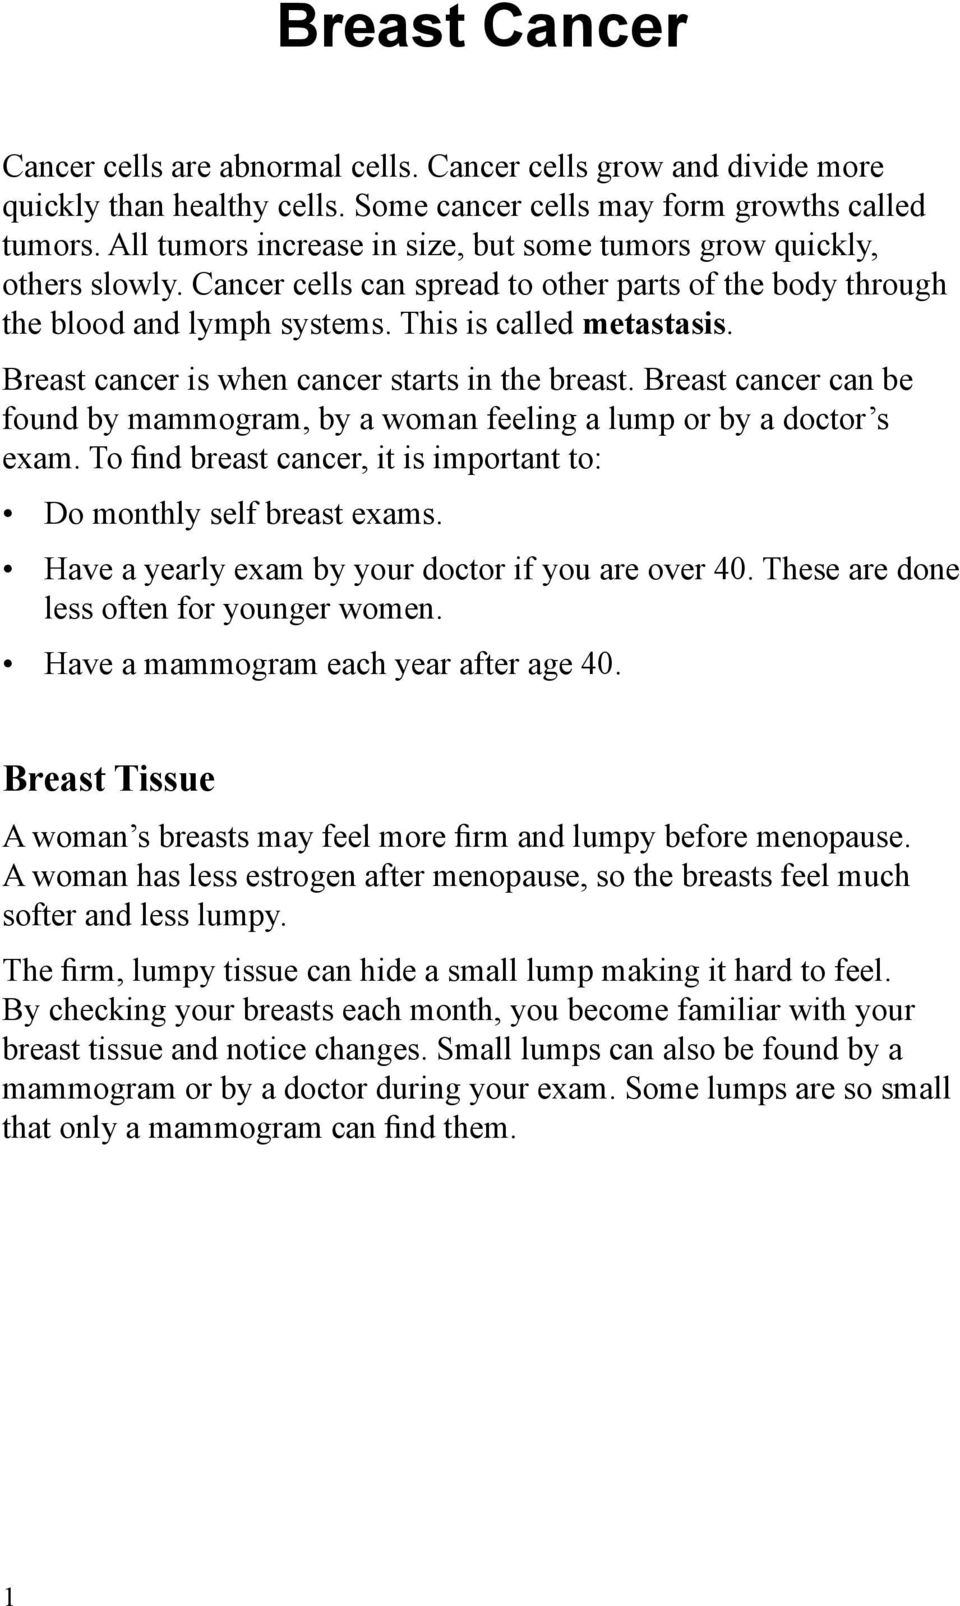 Breast cancer is when cancer starts in the breast. Breast cancer can be found by mammogram, by a woman feeling a lump or by a doctor s exam.